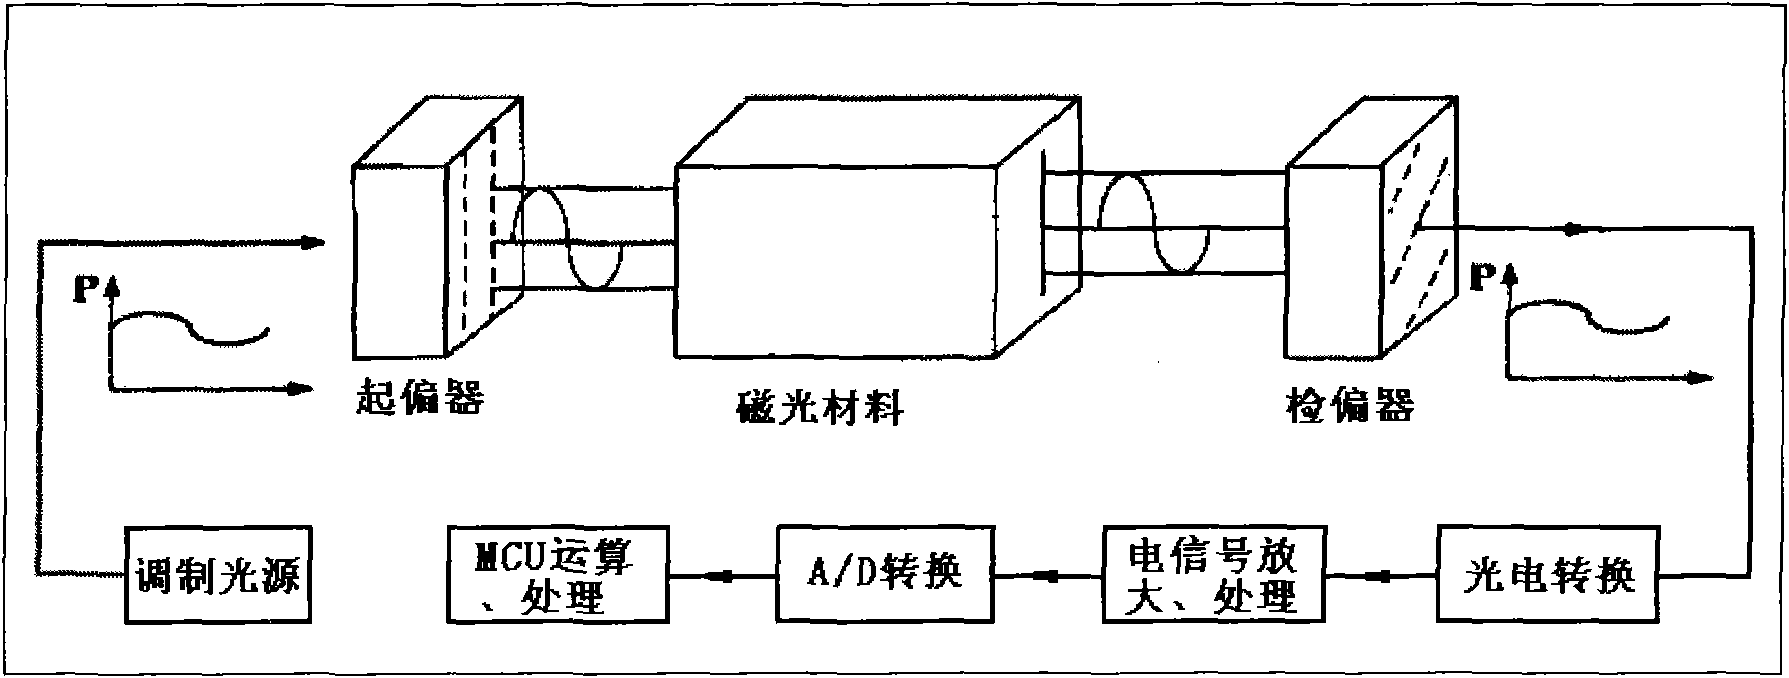 Primary current signal simulator for optical current transformer